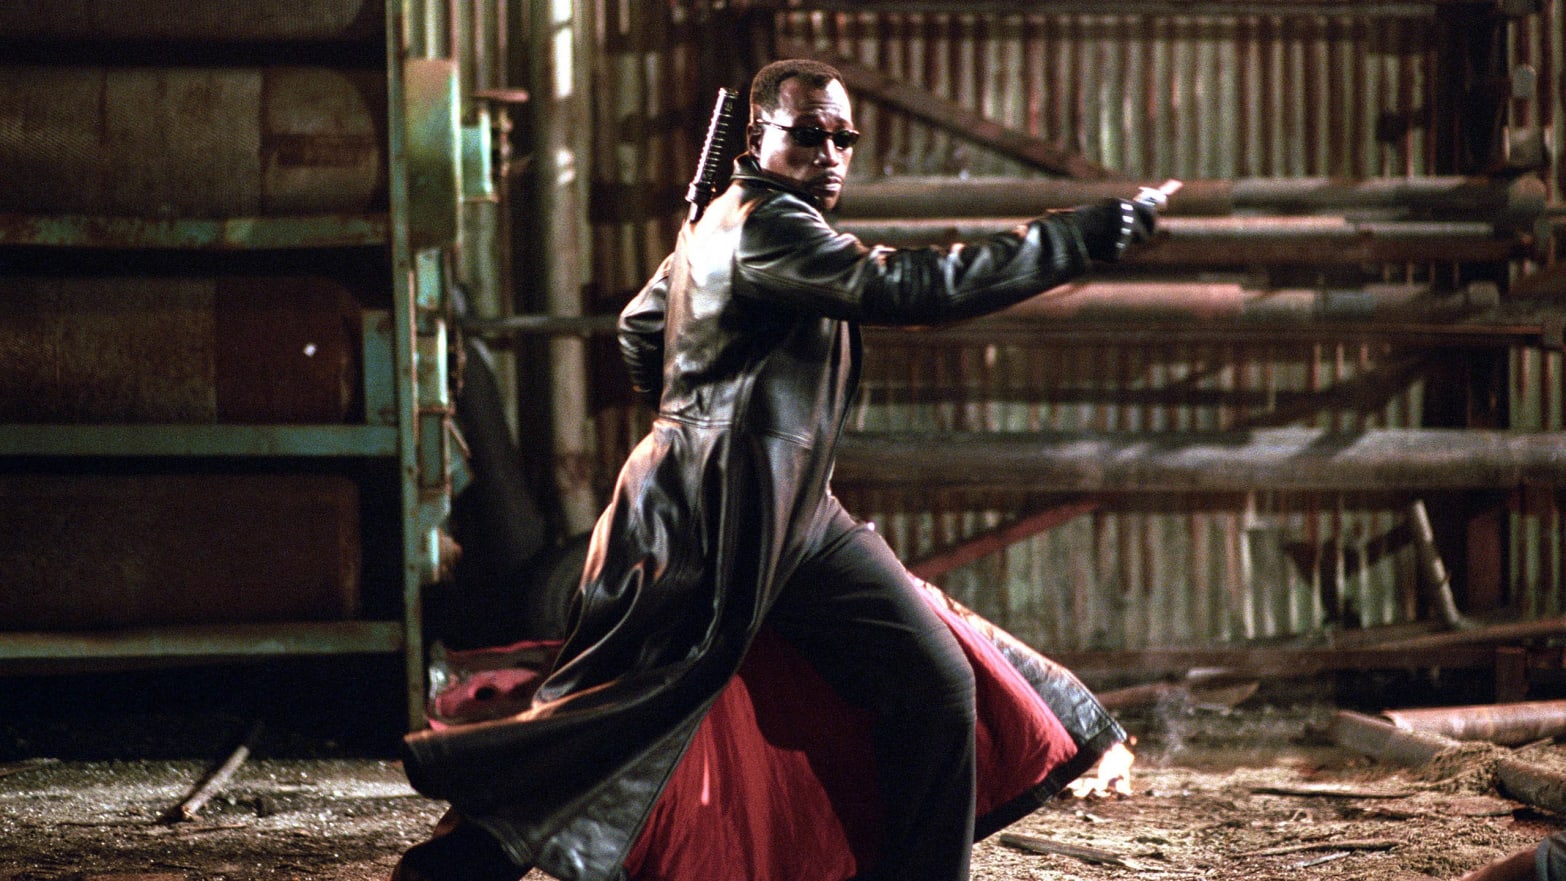 DID YOU KNOW: Blade was produced by Marvel Studios?